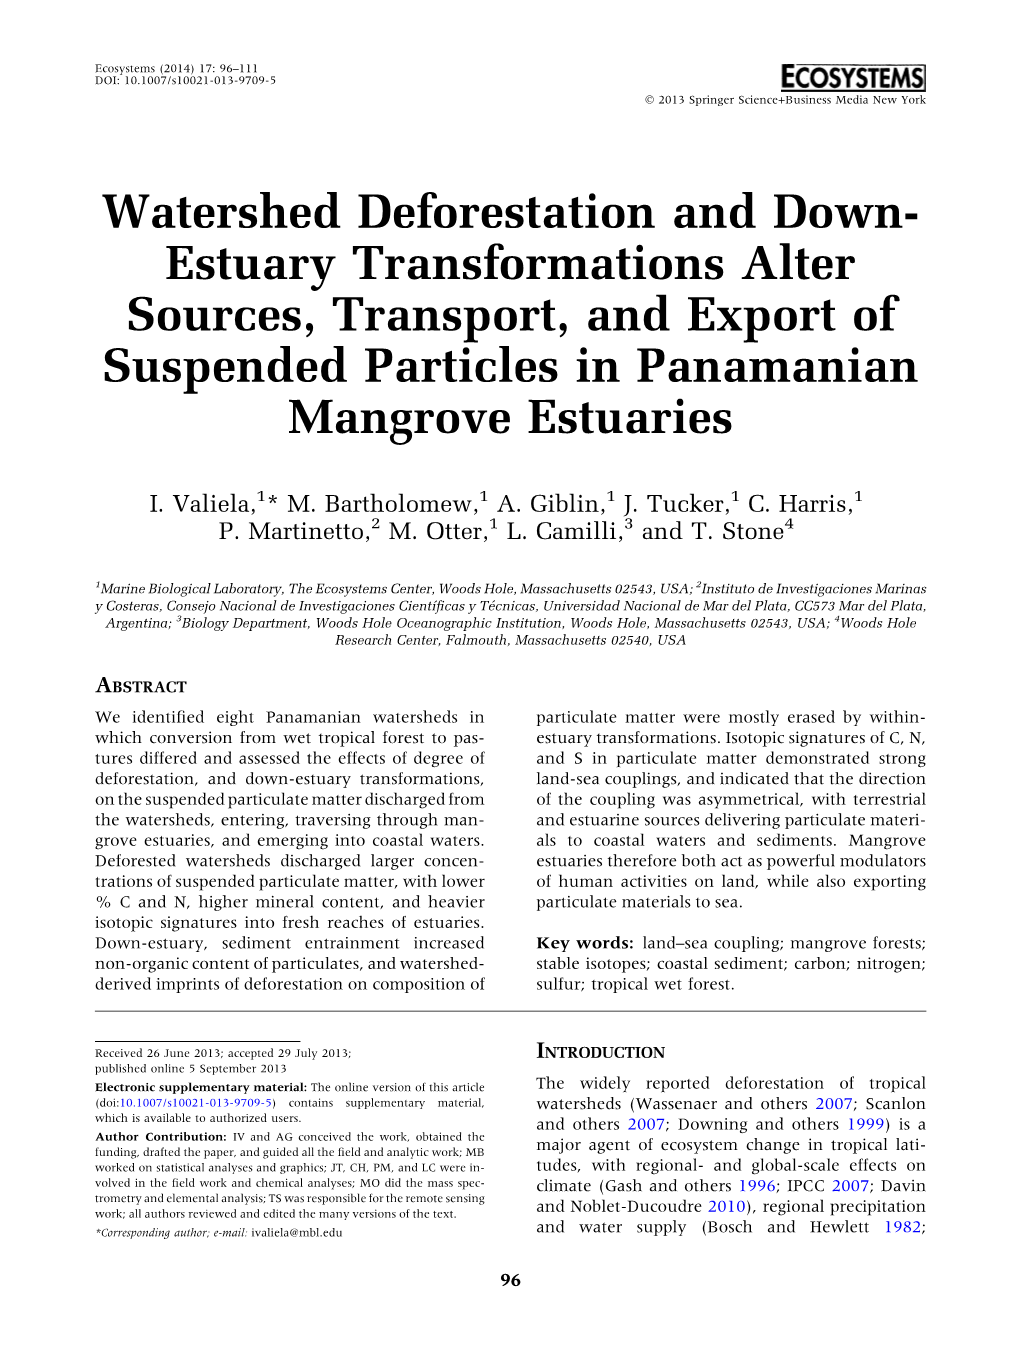 Watershed Deforestation and Down- Estuary Transformations Alter Sources, Transport, and Export of Suspended Particles in Panamanian Mangrove Estuaries